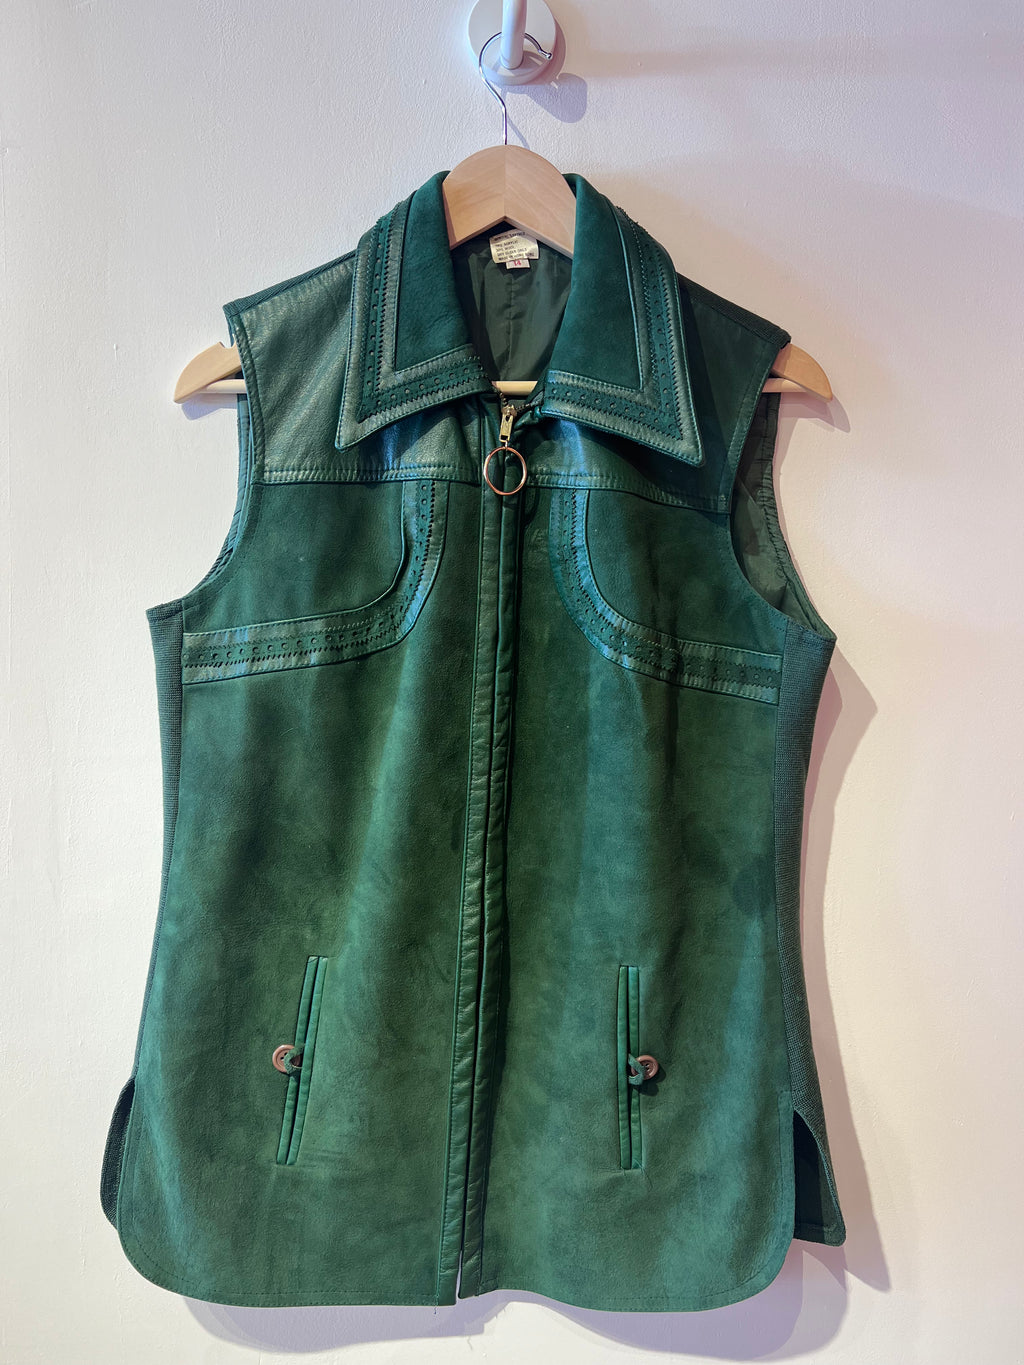 Evergreen Leather & Wool Vest